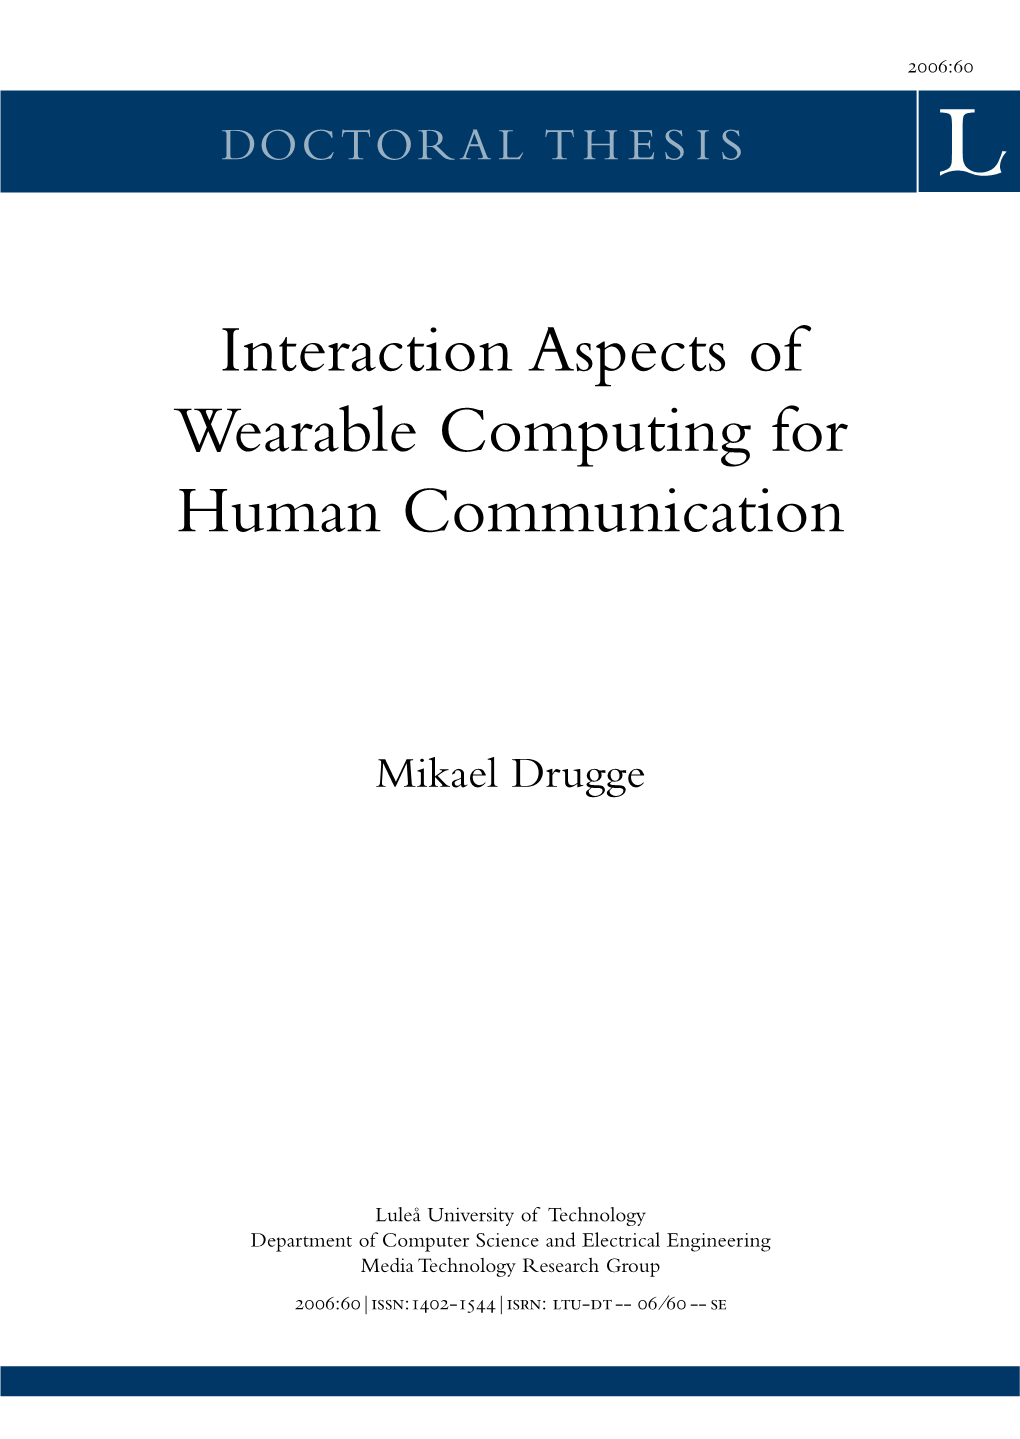 Interaction Aspects of Wearable Computing for Human Communication